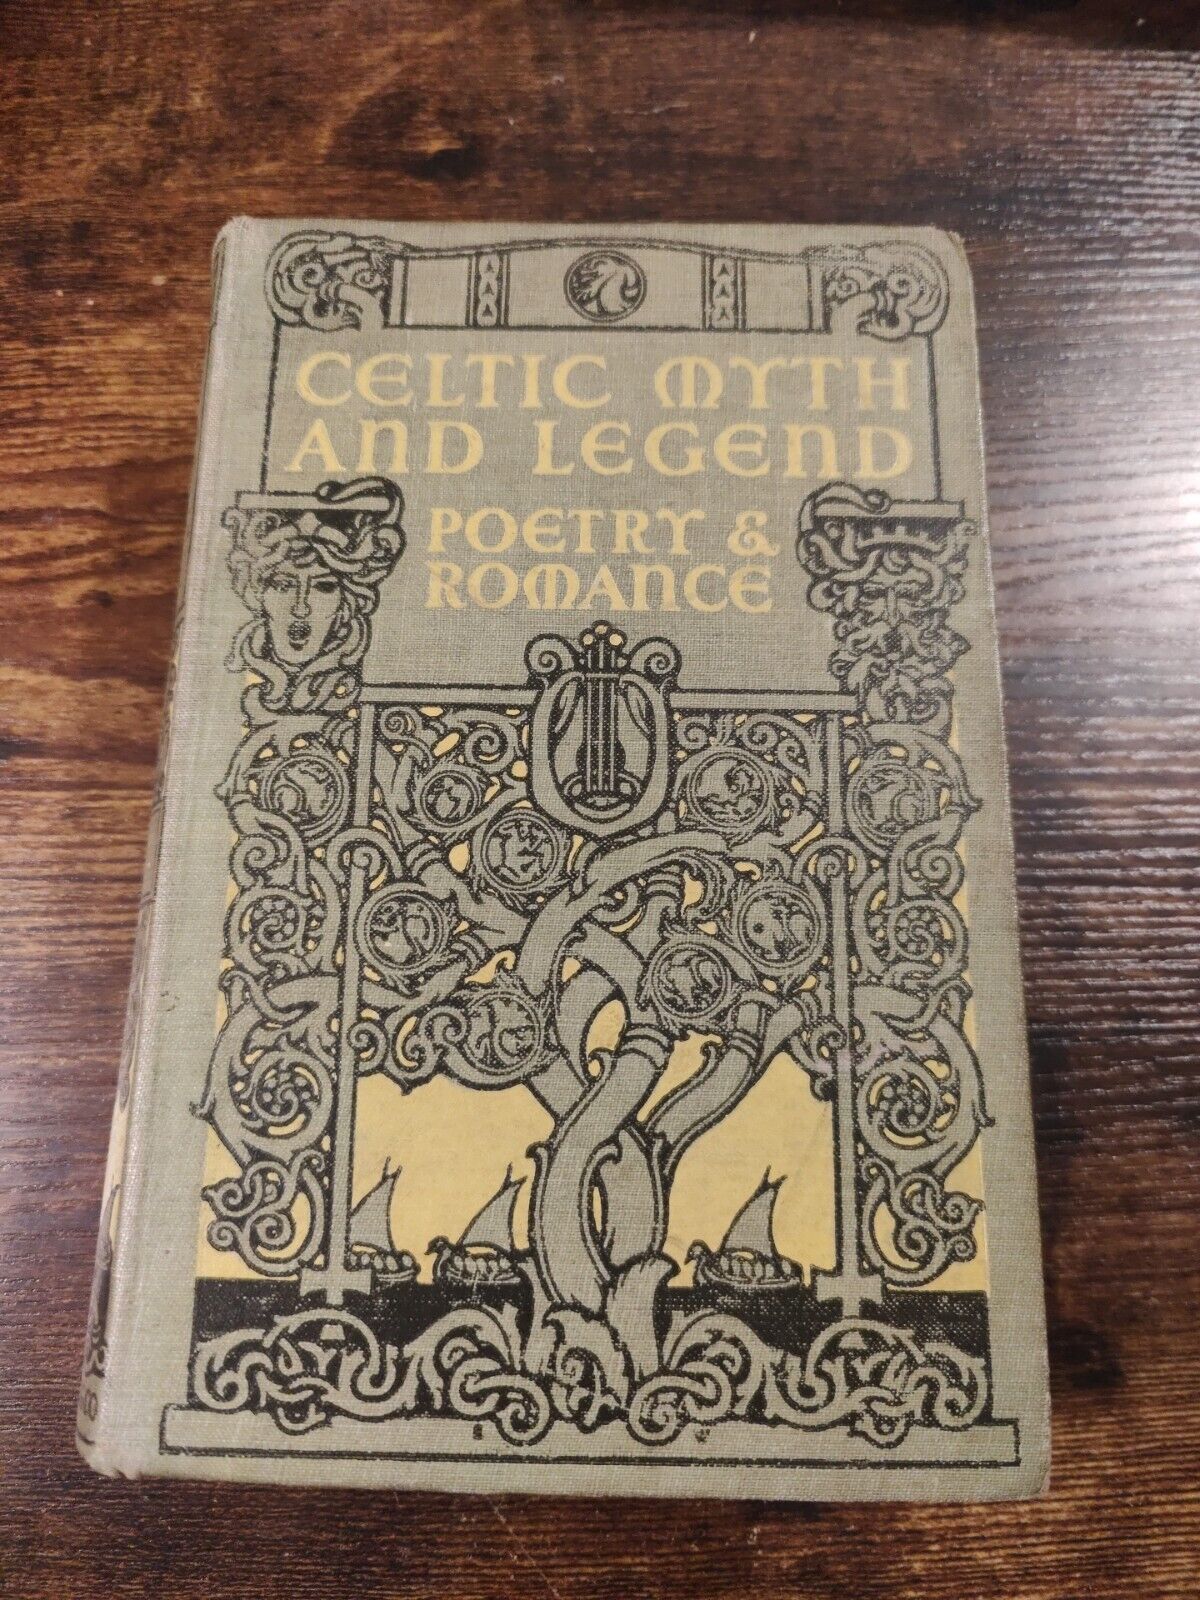 1910 Vintage Mythology Book: Celtic Myth And Legend By Charles Squire